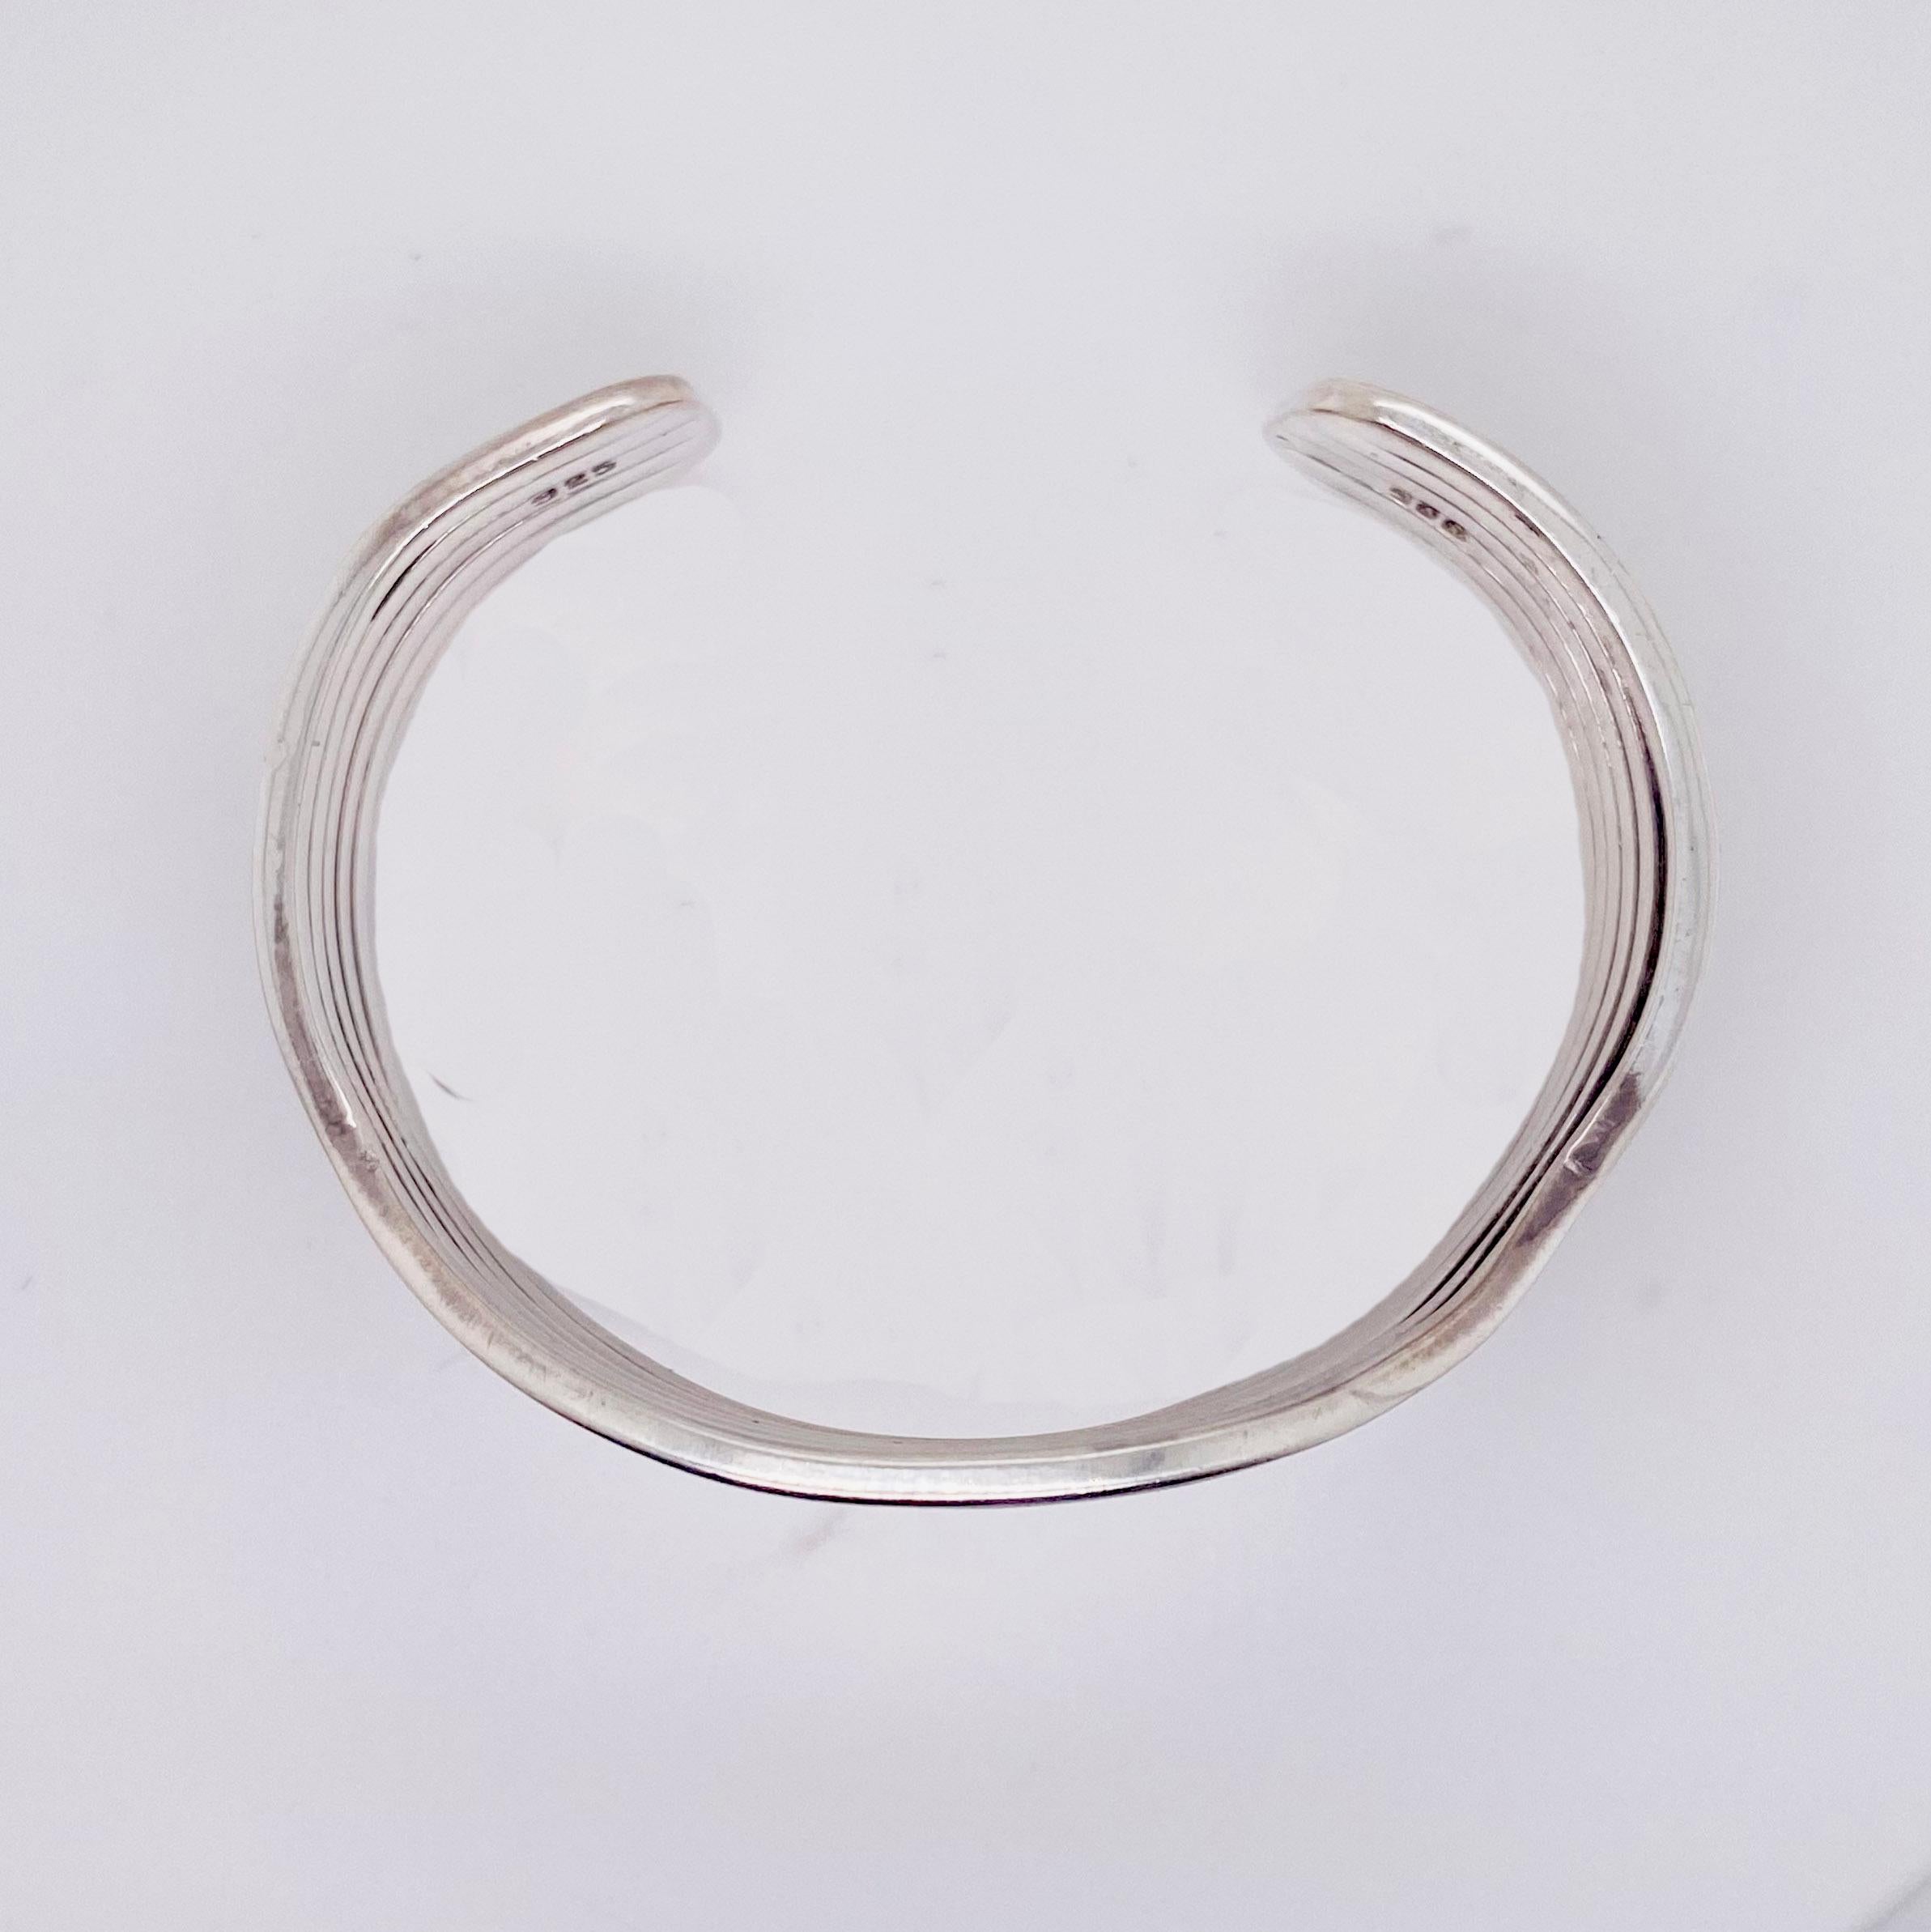 This bracelet was made in our shop by our jewelers.  The bracelet is well-made and nice and thick so that it will never break! The curve in the bracelet is so lovely and looks great on your wrist!  
Bracelet Type: Cuff
Metal Quality: Sterling